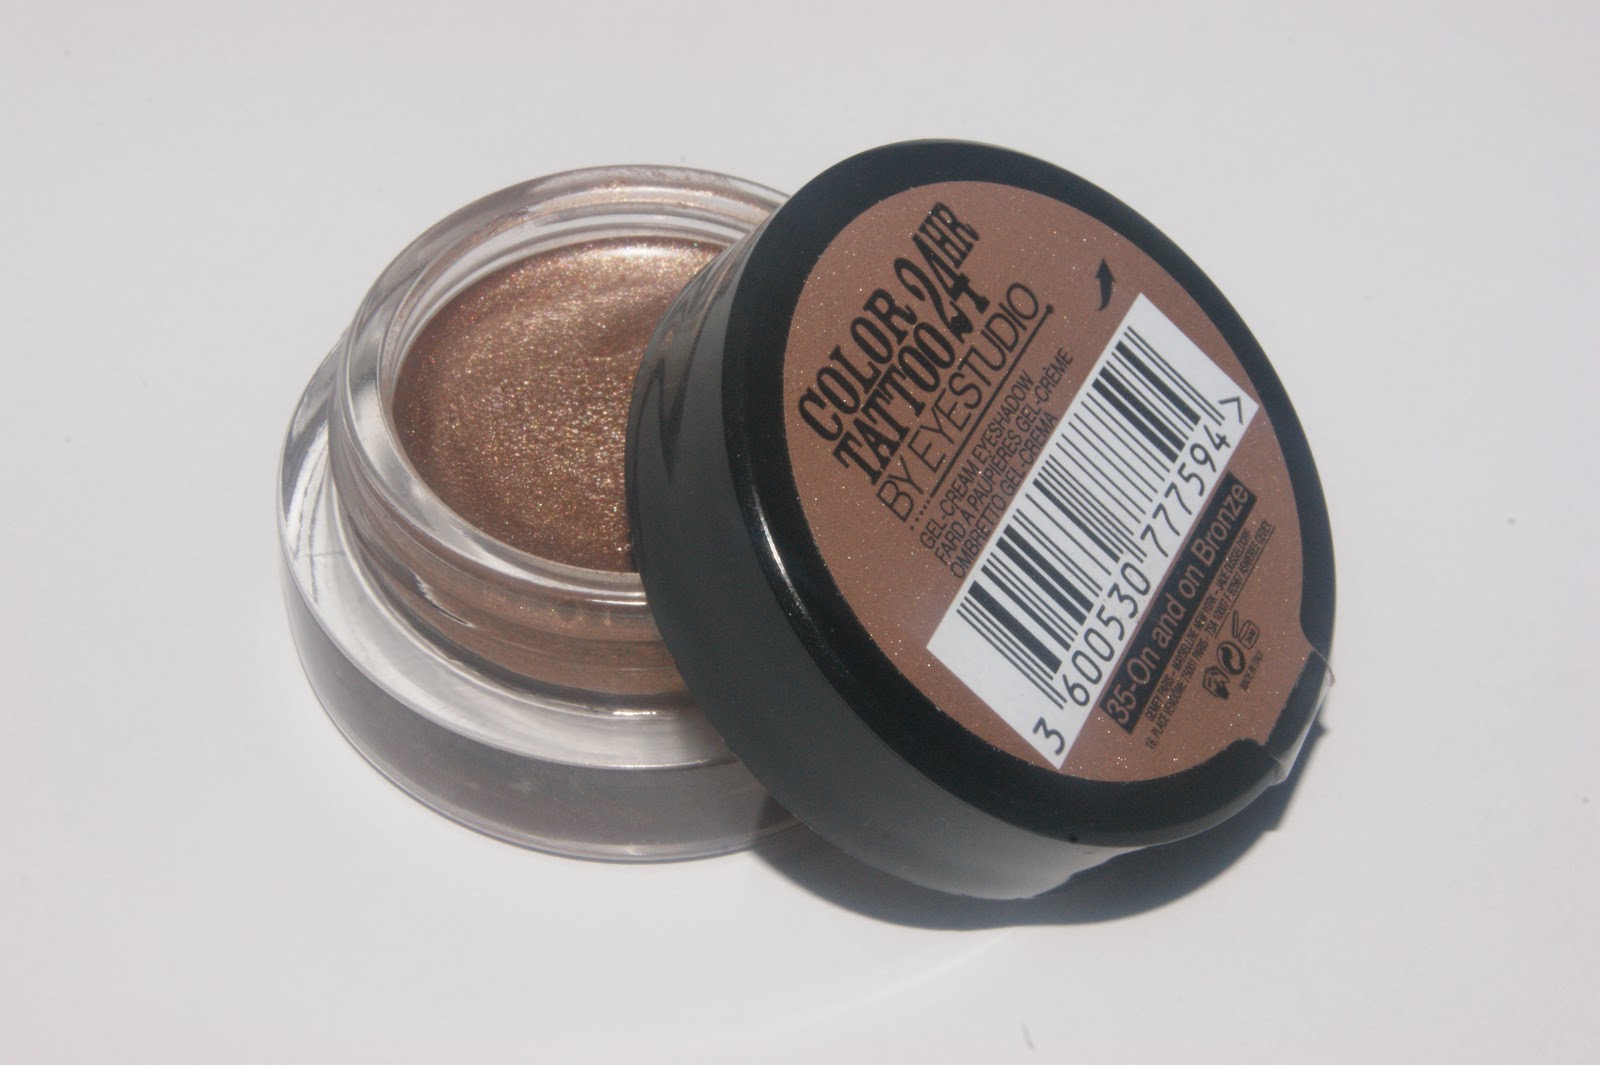 Maybelline Color Tattoo 24hr Eyeshadow in On and On Bronze - Review | The  Sunday Girl